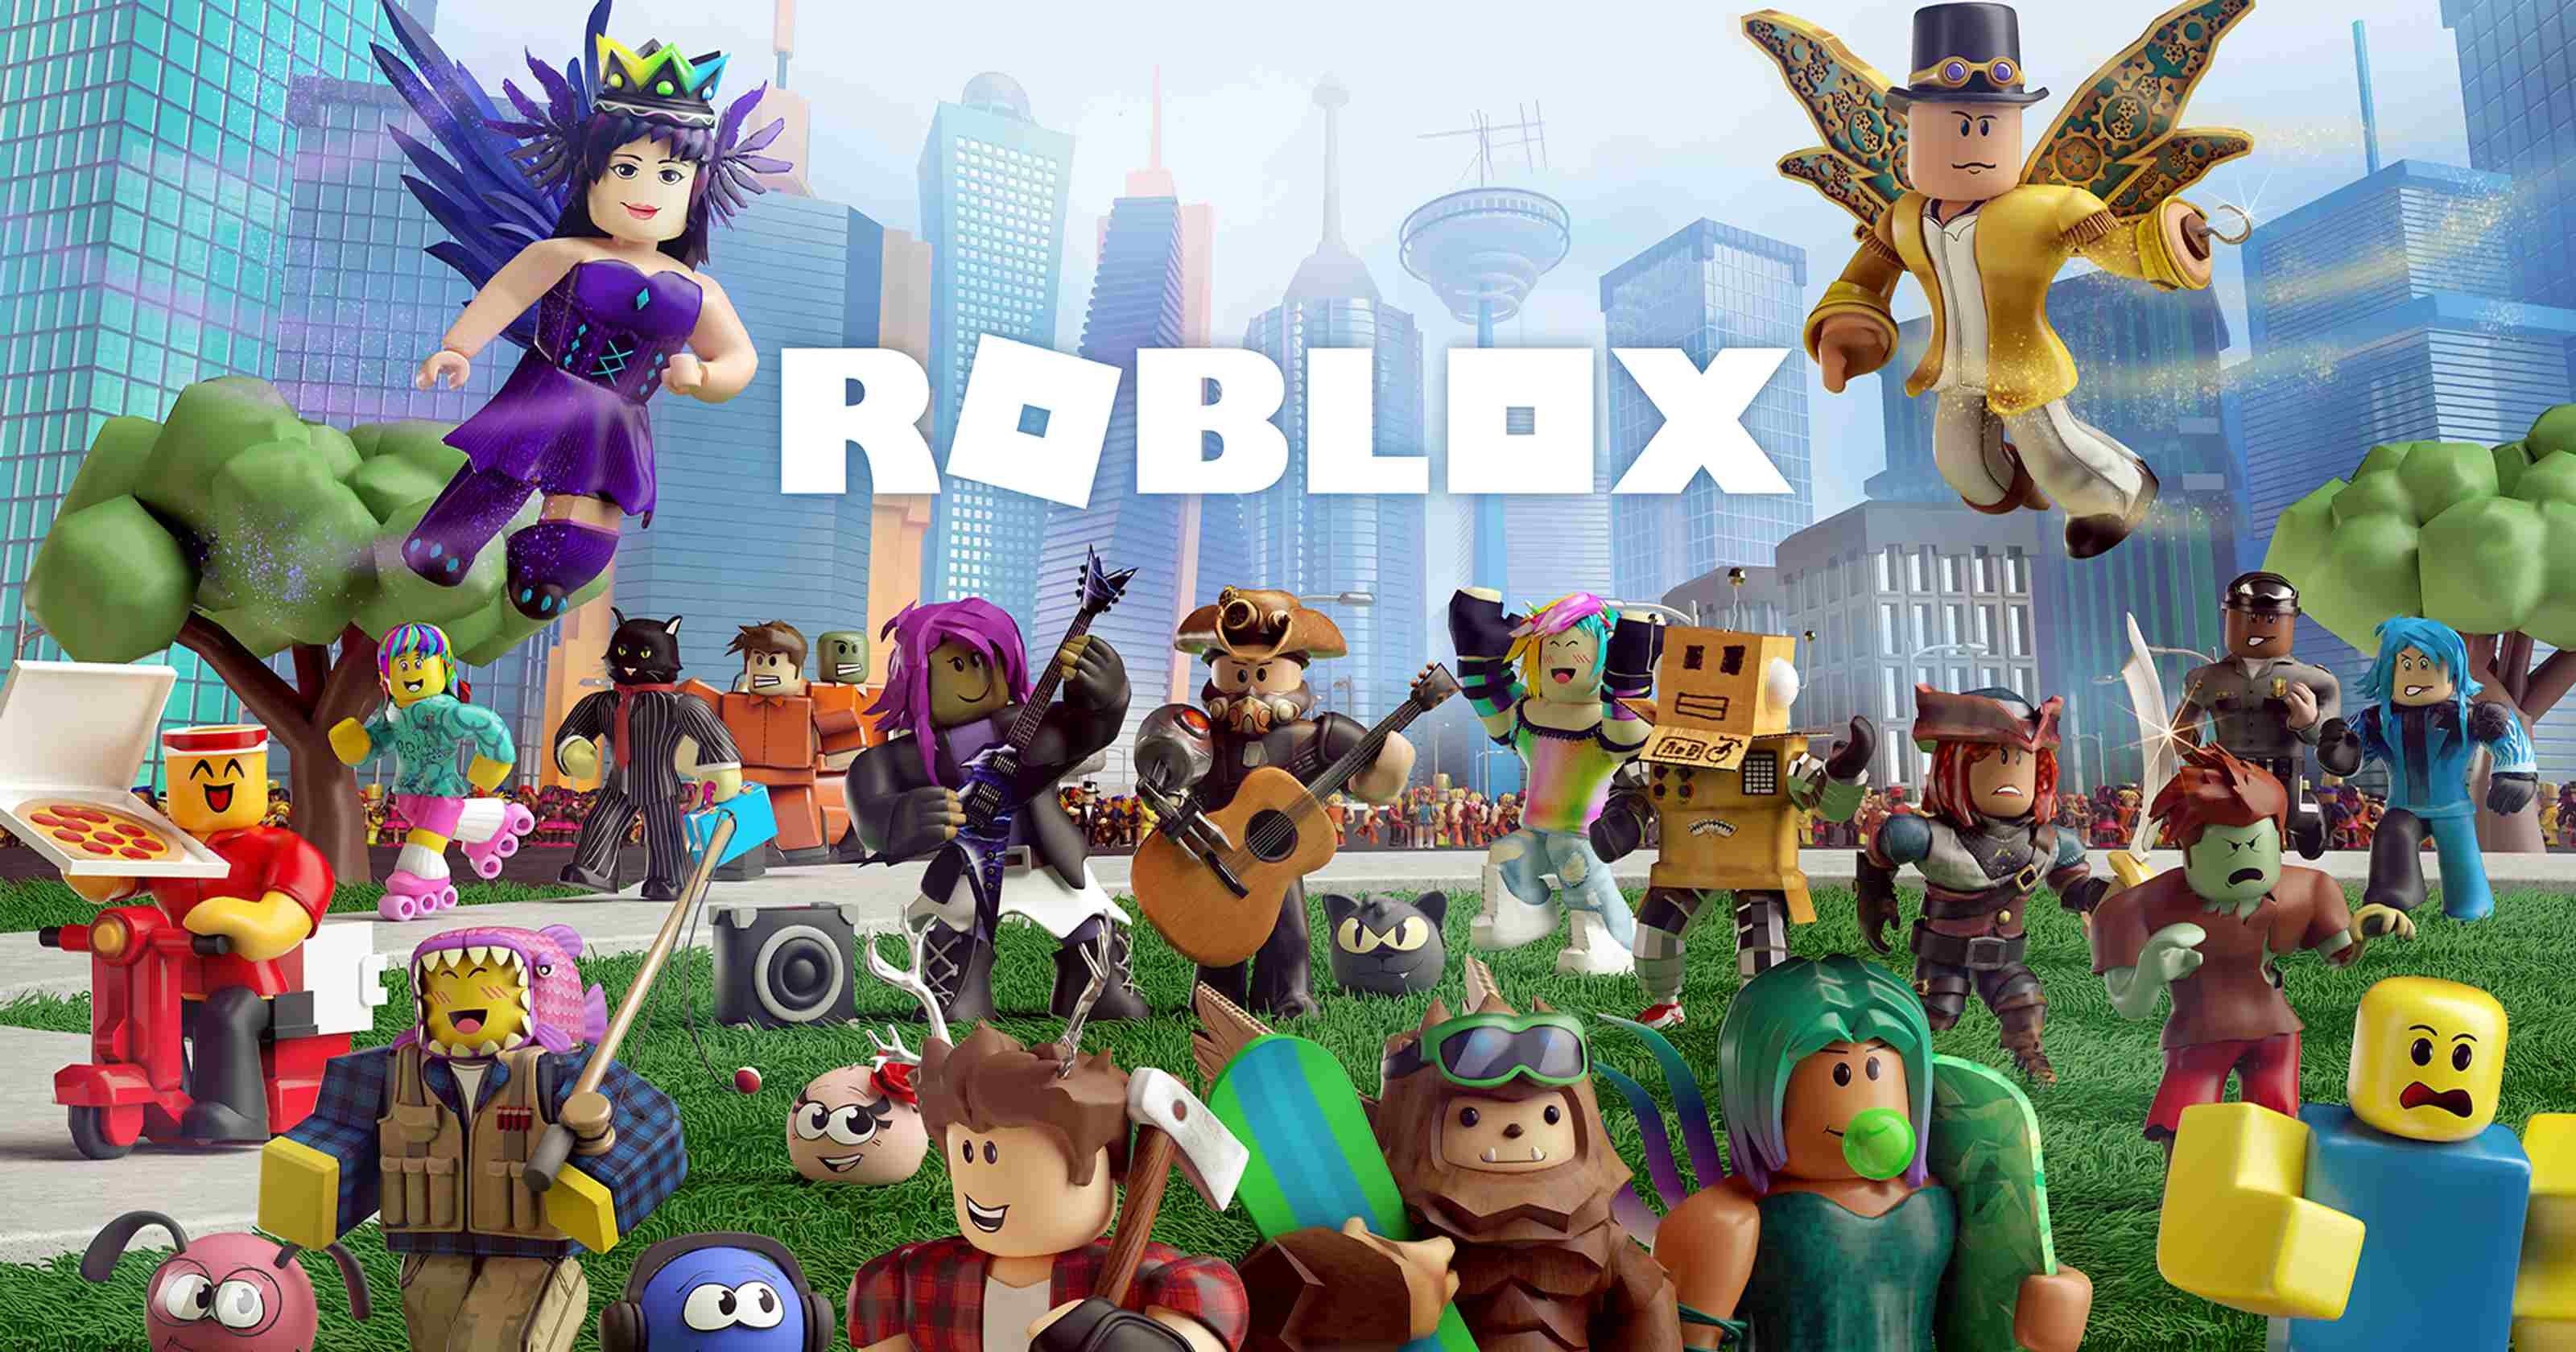 Roblox Wallpaper HD New Tab Roblox Themes - HD Wallpapers & Backgrounds